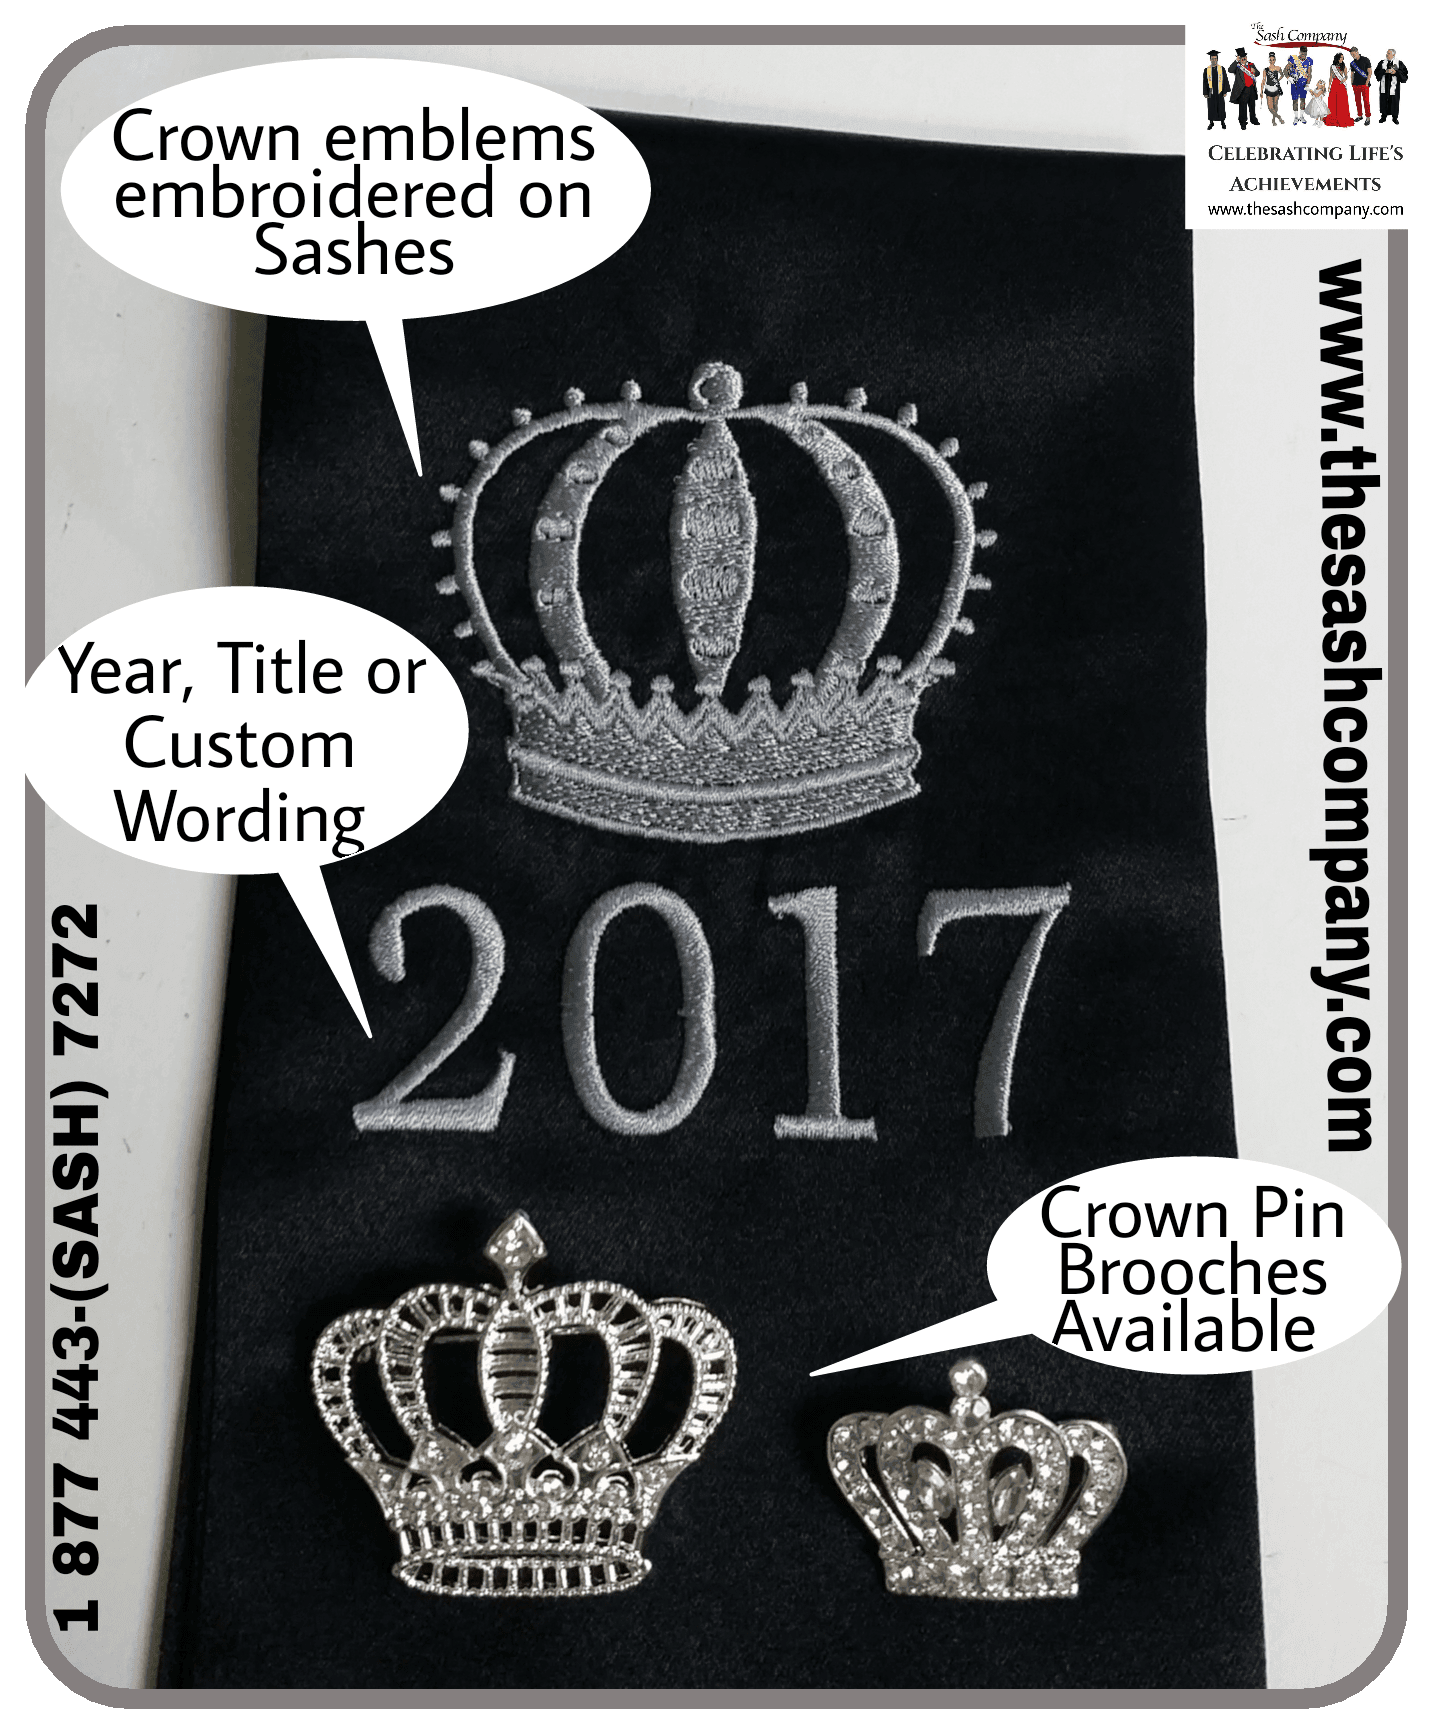 Embroidered Crown on a Sash and Crown Brooch Pins